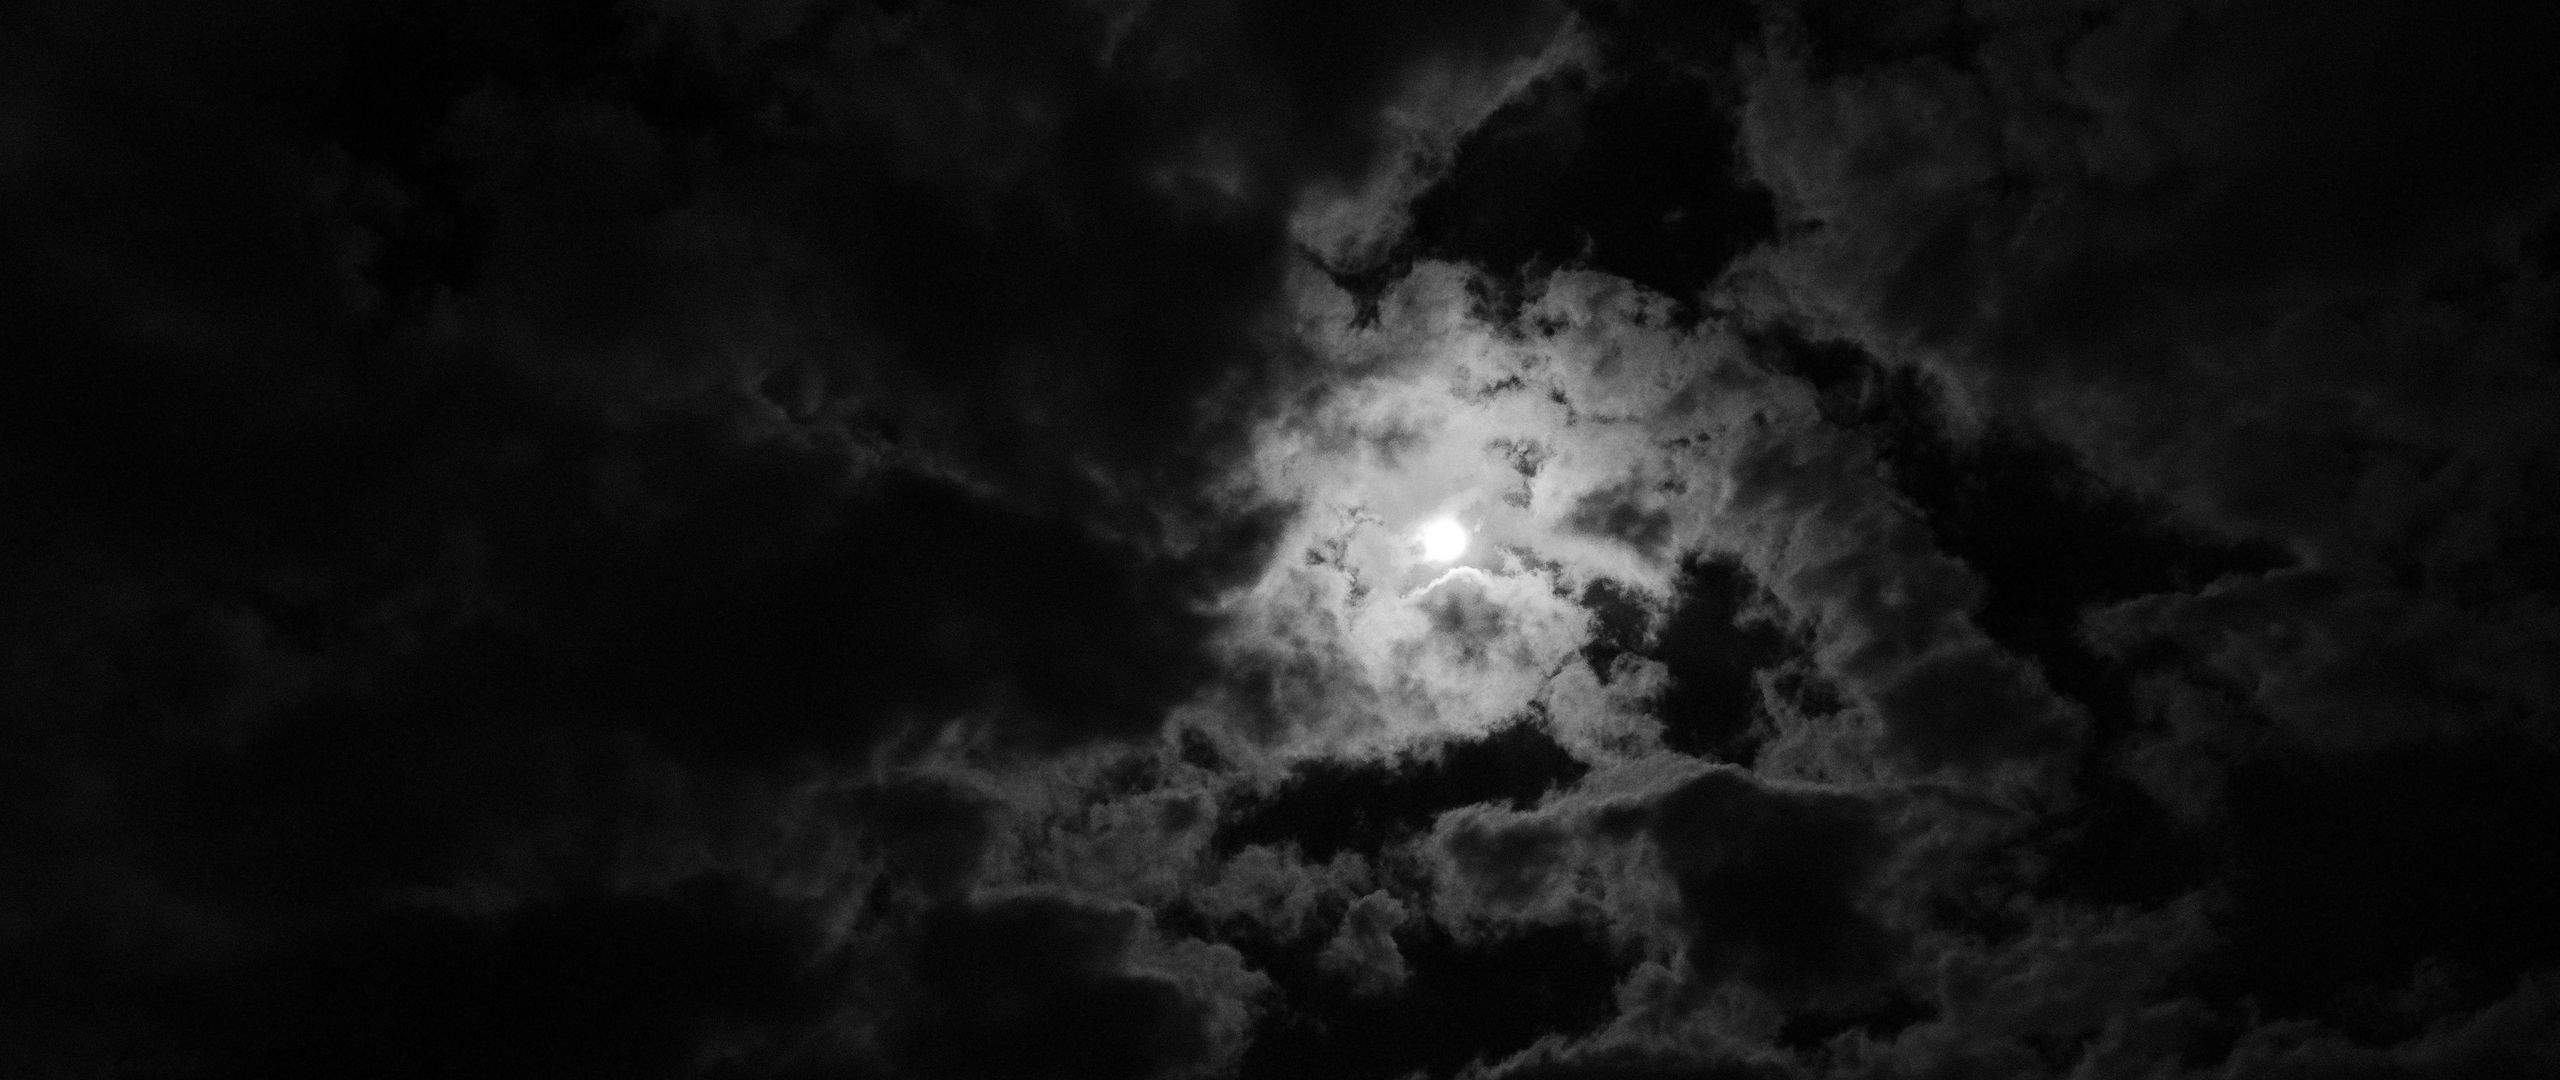 Download wallpaper 2560x1080 moon, clouds, night, bw dual wide 1080p hd ...